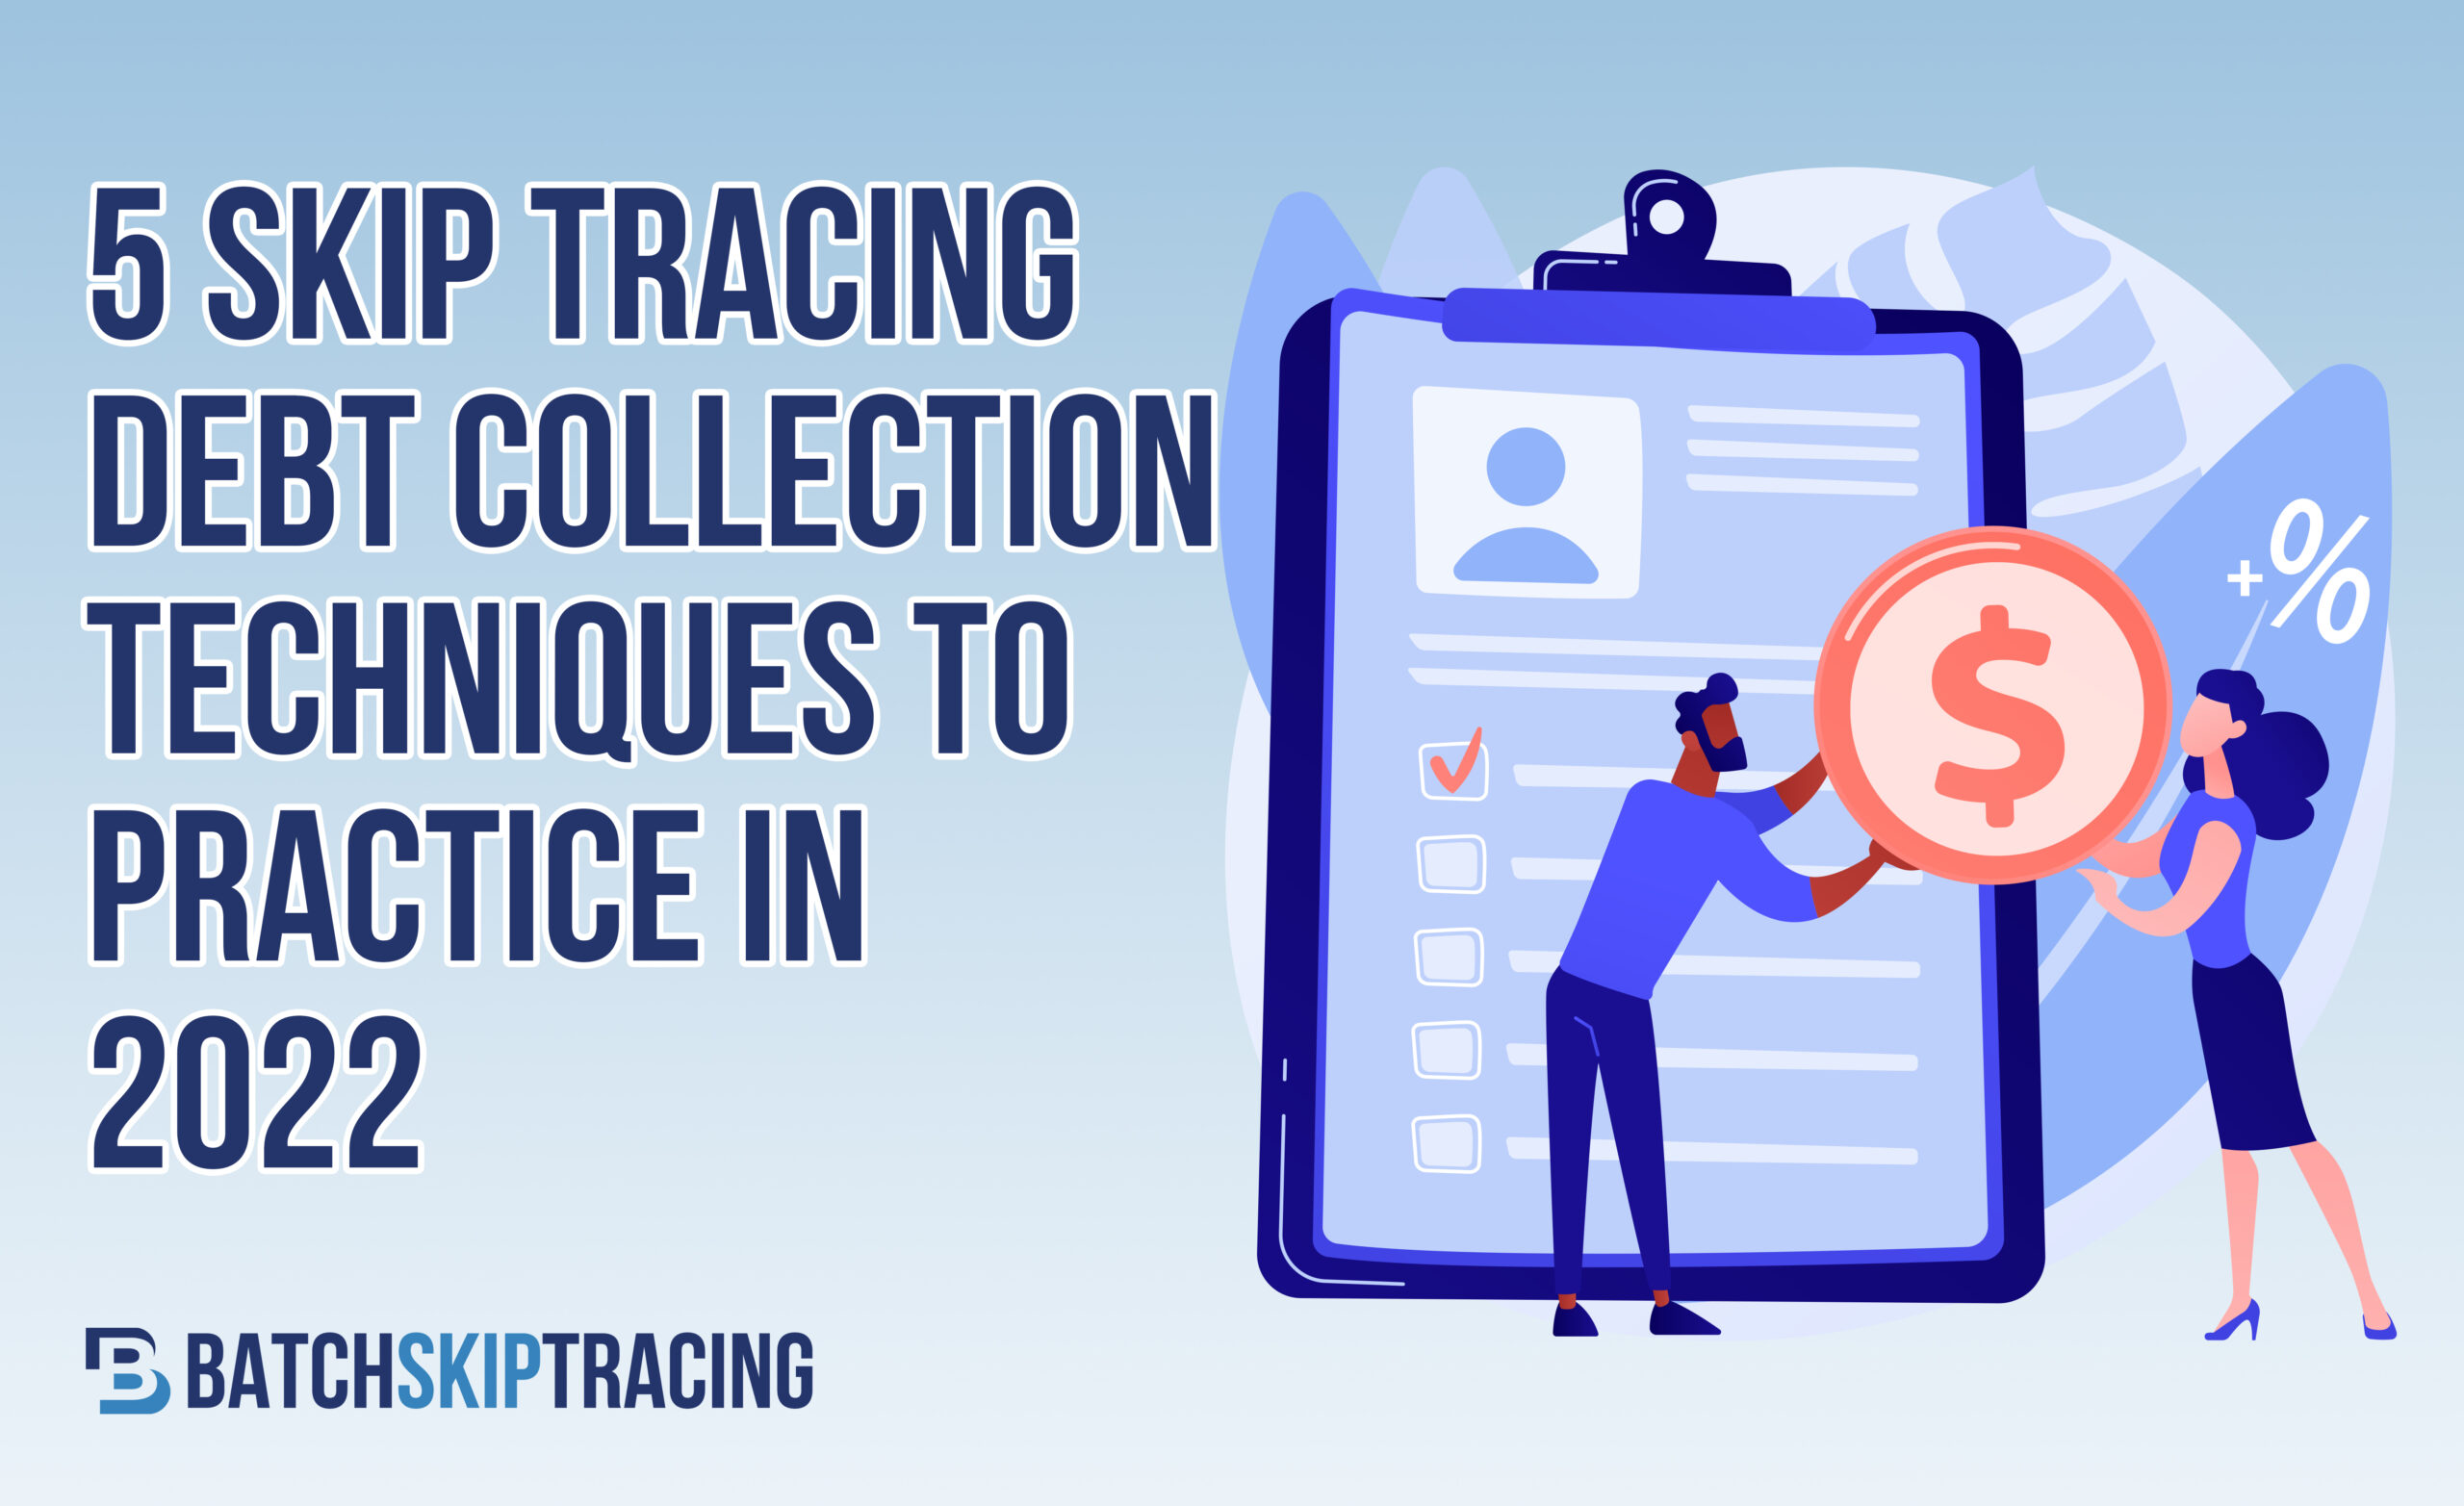 5 Skip Tracing Debt Collection Techniques To Practice In 2022